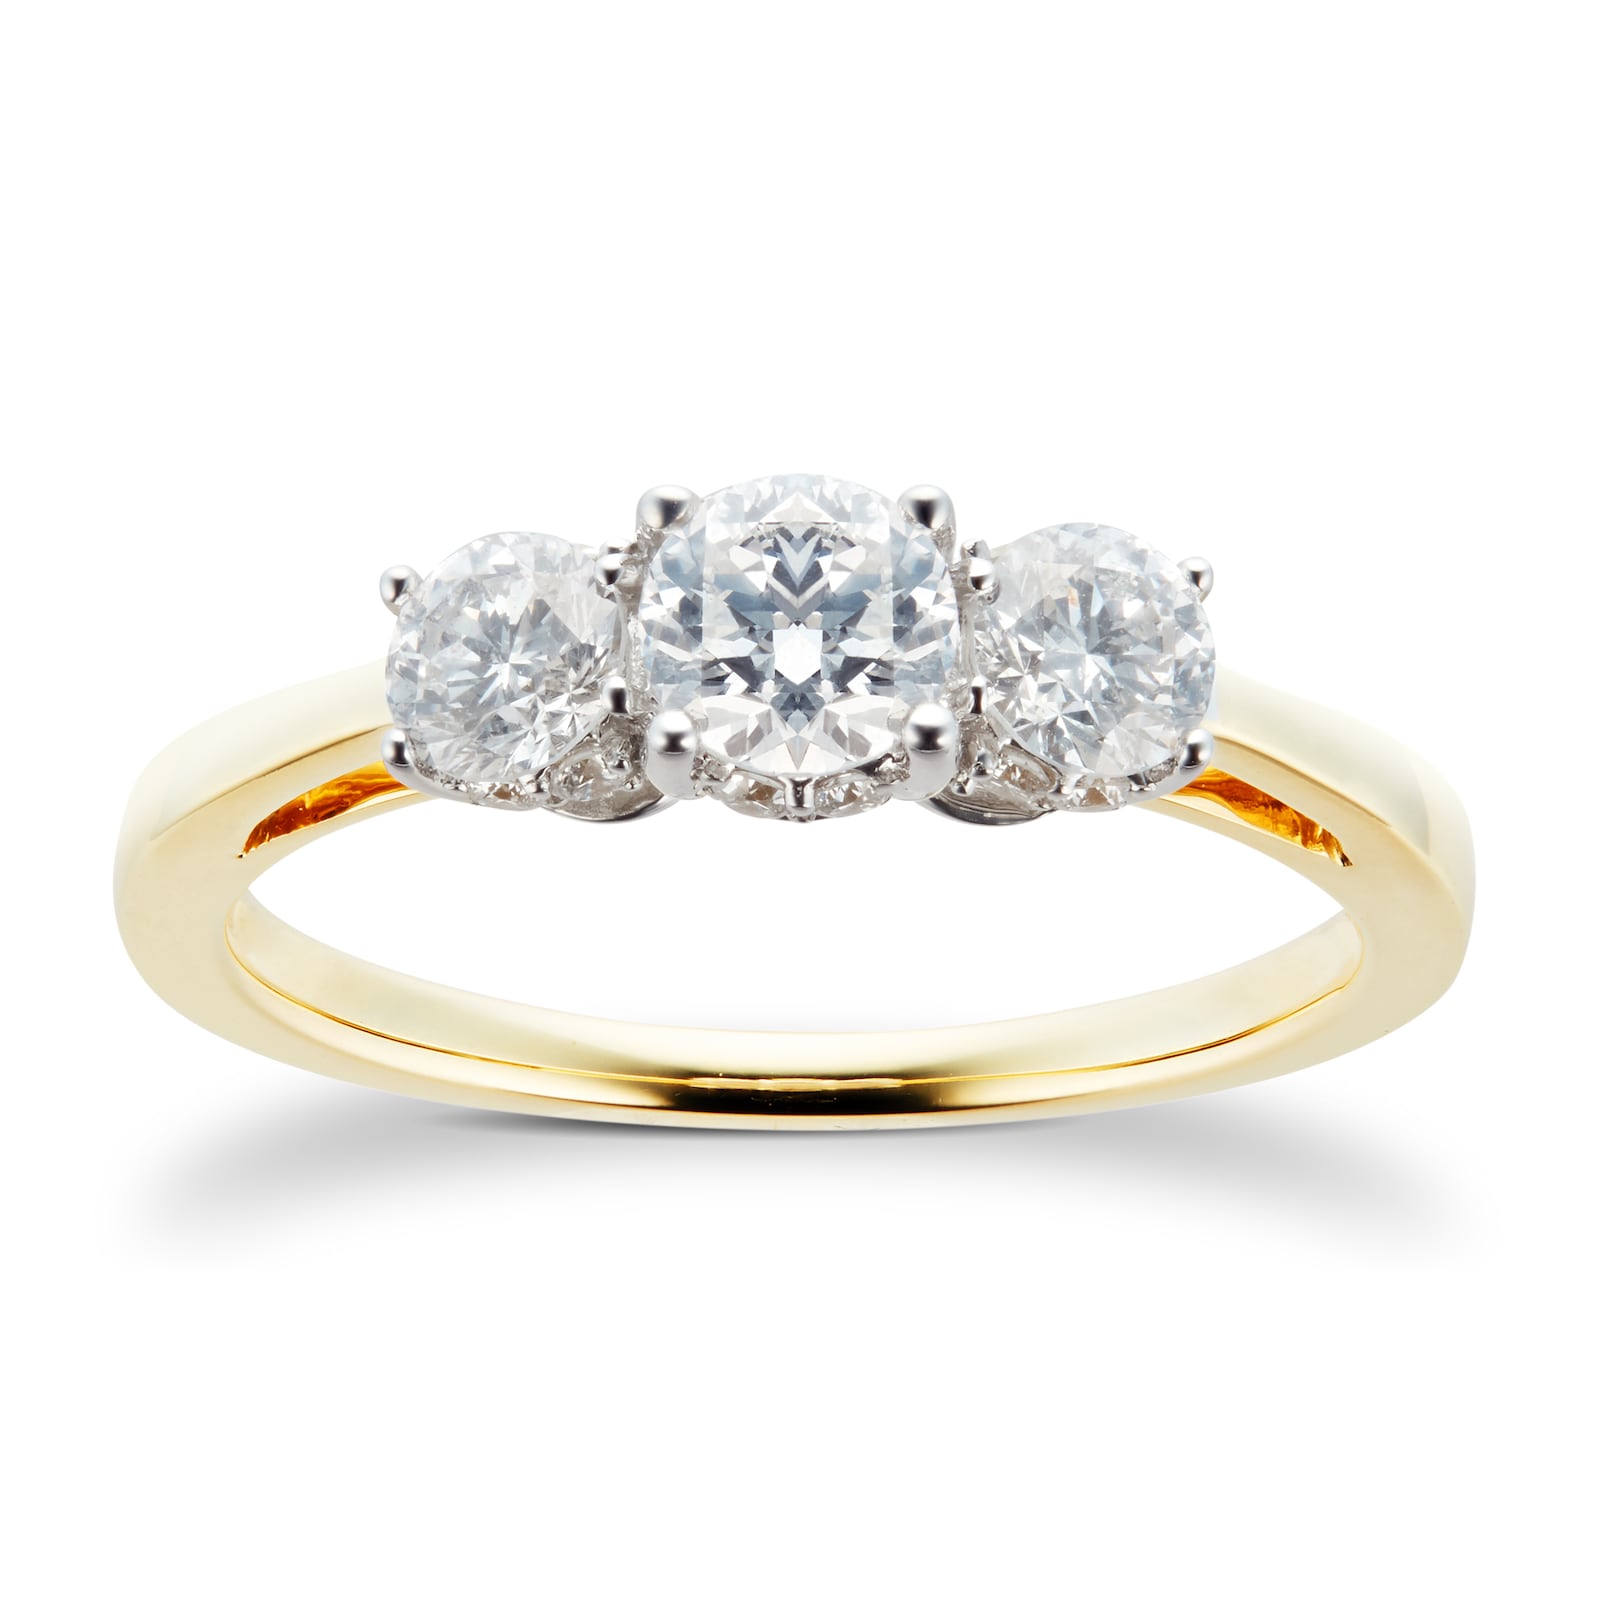 Facets of Fire 3 Stone Diamond Ring, Yellow Gold